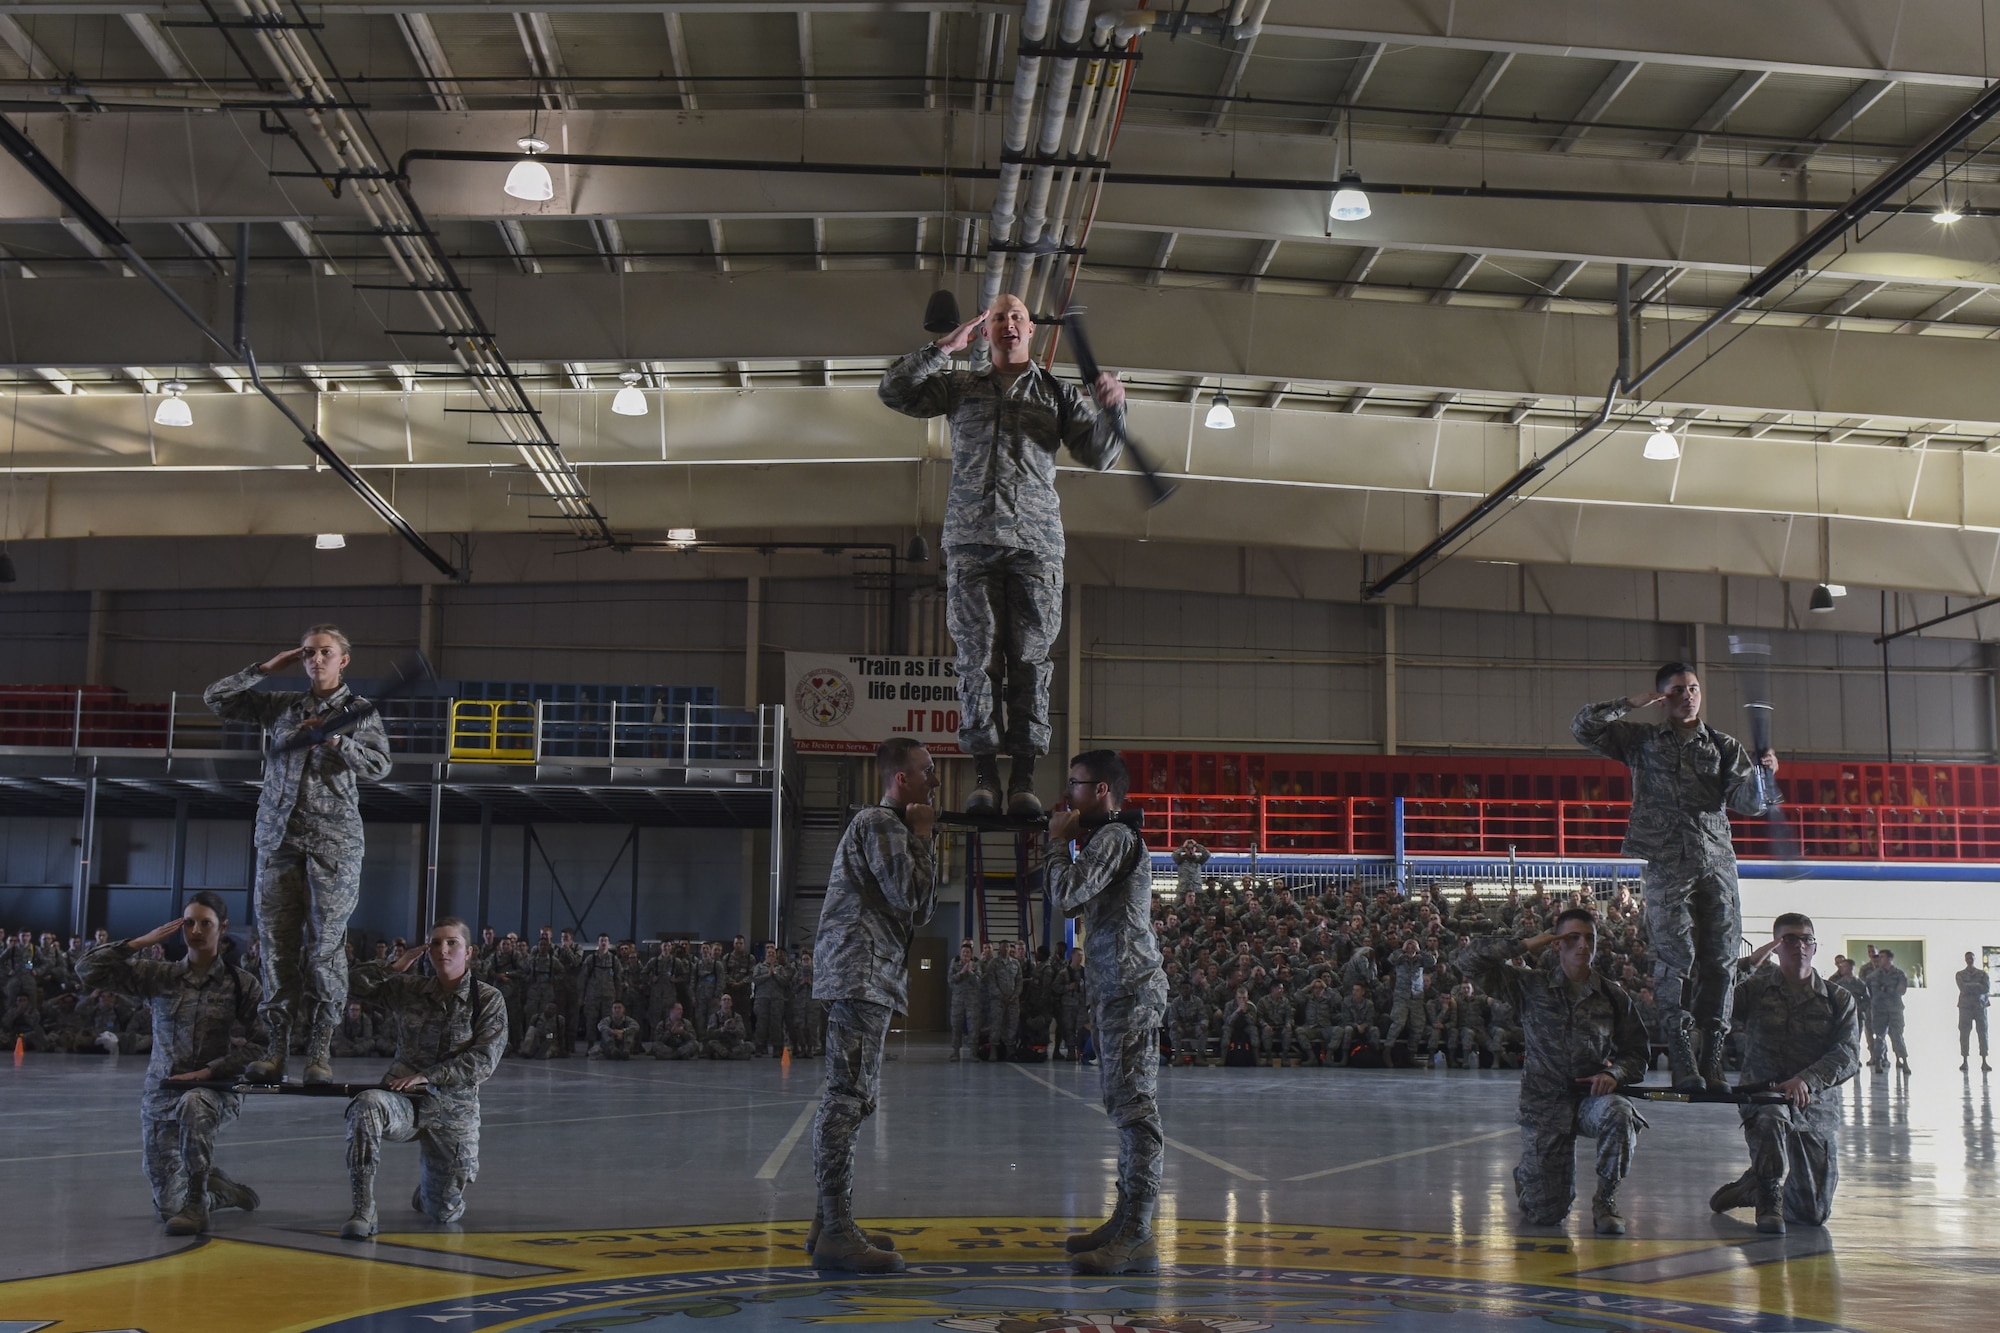 The 316th Training Squadron drill team addresses the judge at the end of their regulation drill segment during the 17th Training Group drill competition at the Louis F. Garland Department of Defense Fire Academy on Goodfellow Air Force Base, Texas, Dec. 15, 2017. The 316th TRS finished off their routine with a display of skill and balance. (U.S. Air Force Photo by Airman 1st Class Zachary Chapman/Released)